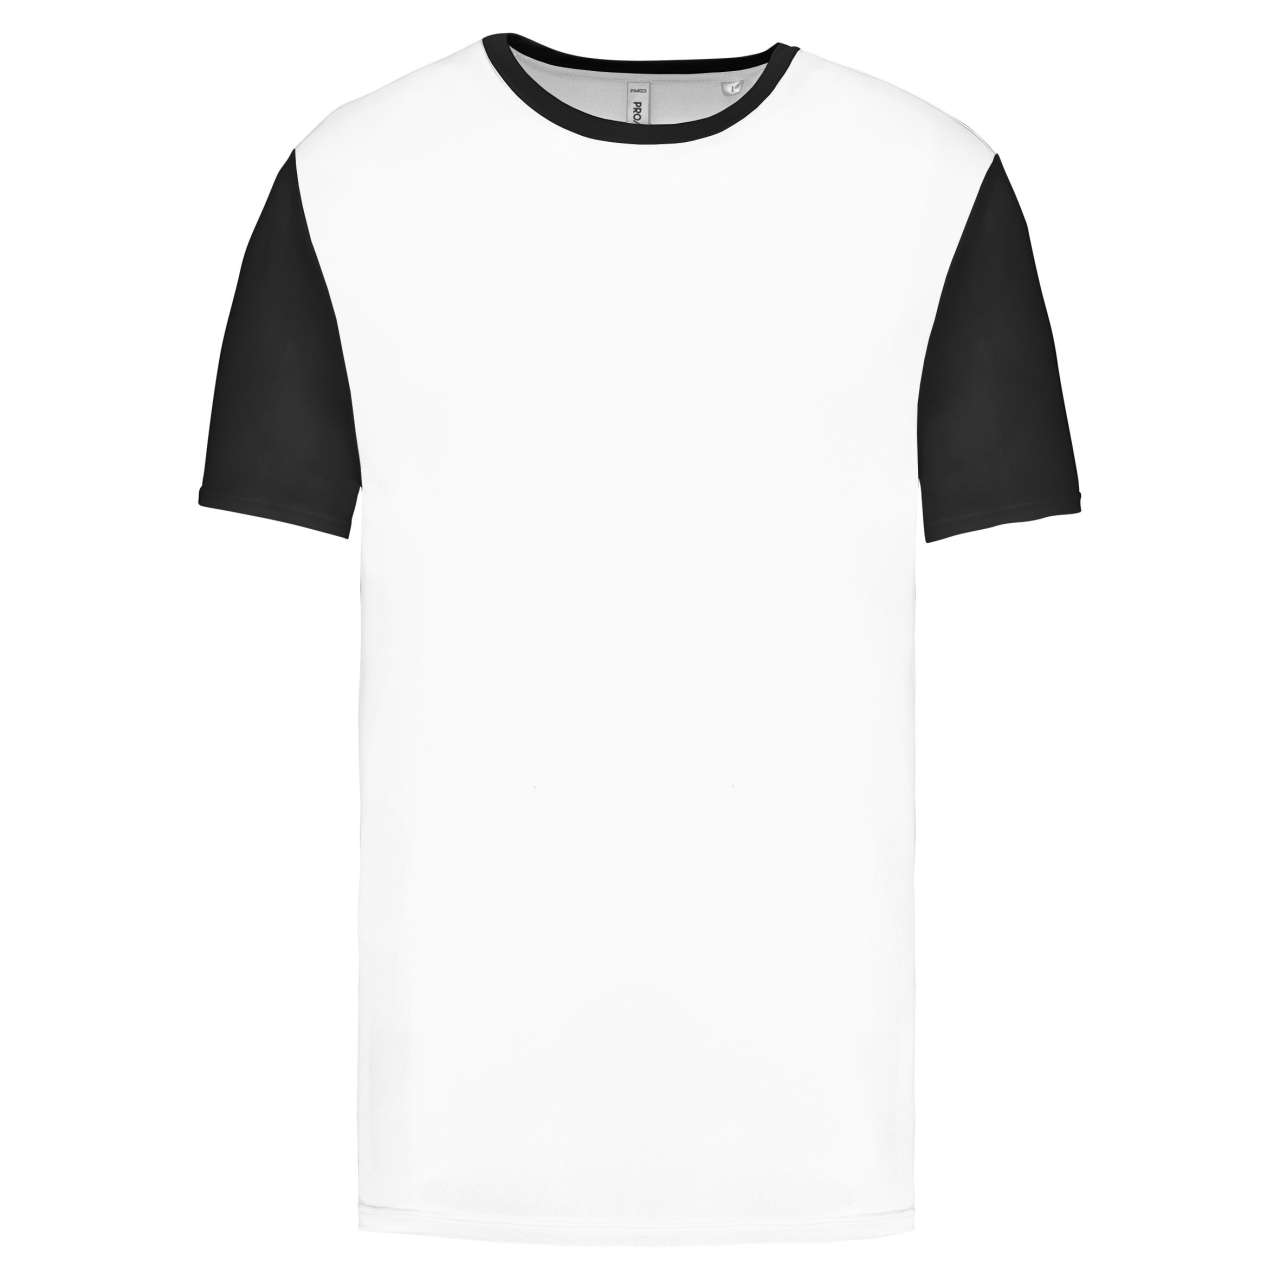 Promo  ADULTS' BICOLOUR SHORT-SLEEVED T-SHIRT